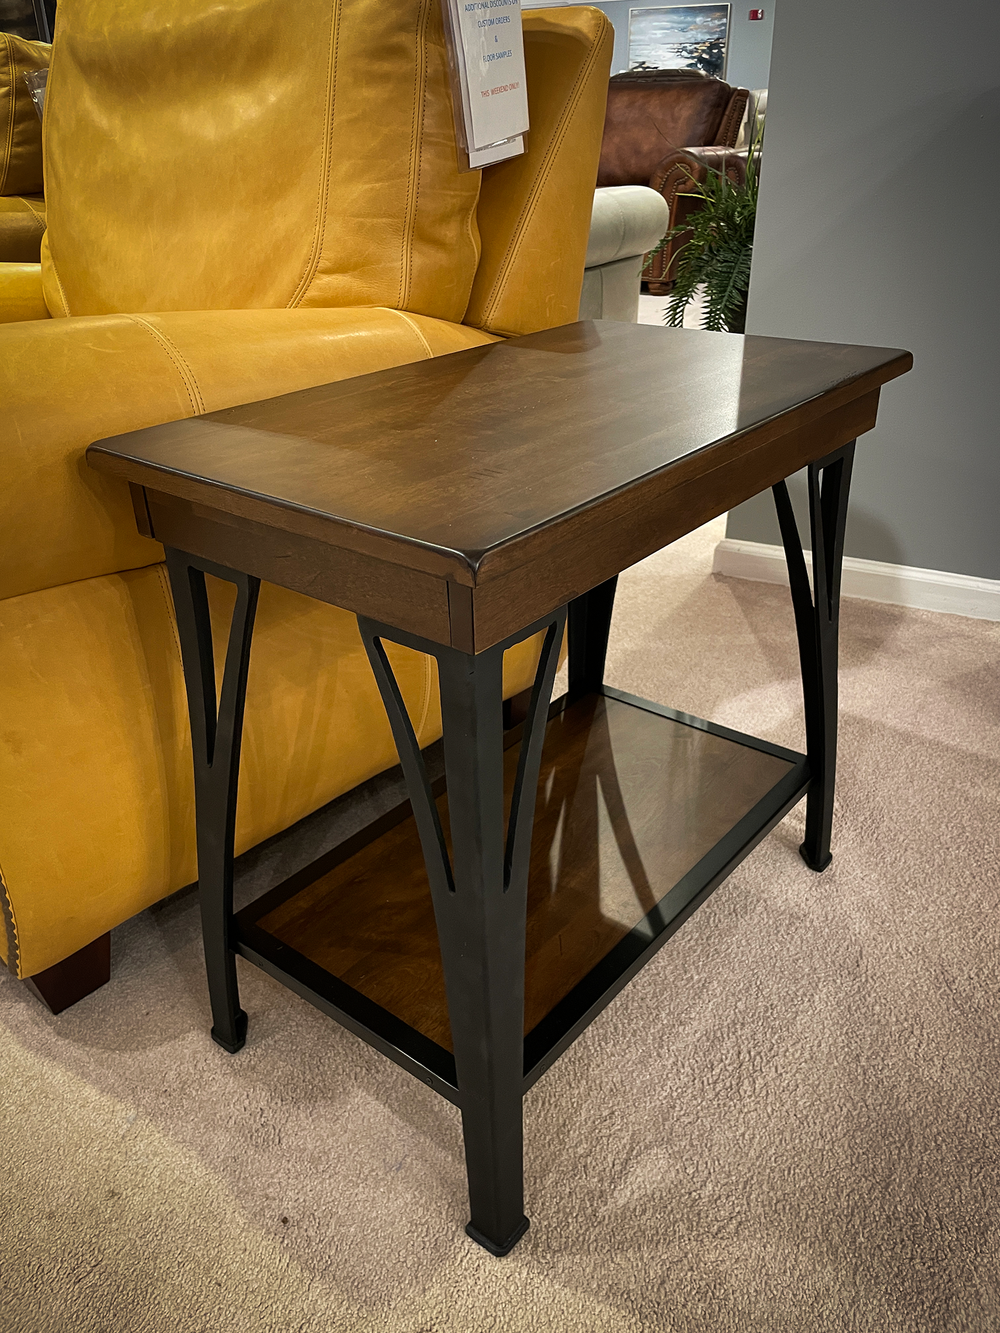 District Chair Side Table - IN STOCK!